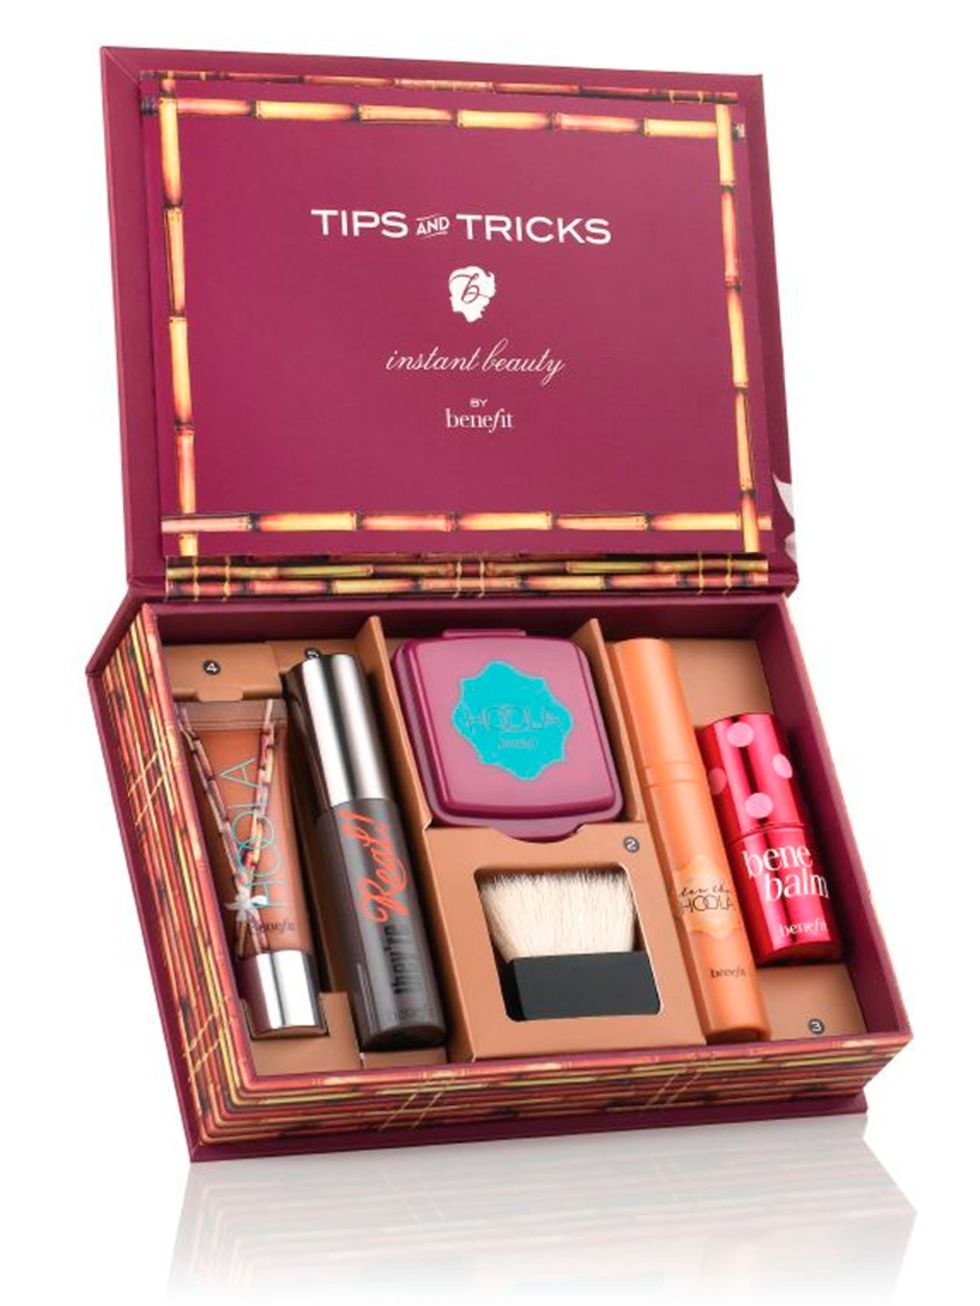 <p><a href="https://www.benefitcosmetics.co.uk/product/view/hoola" target="_blank">Benefit Do The Hoola, £28.50 </a></p>

<p>Essentially a pack-of-cards-sized box of beauty tricks. With mini mascara, bronzer and a Benebalm, the star of the show is the exl